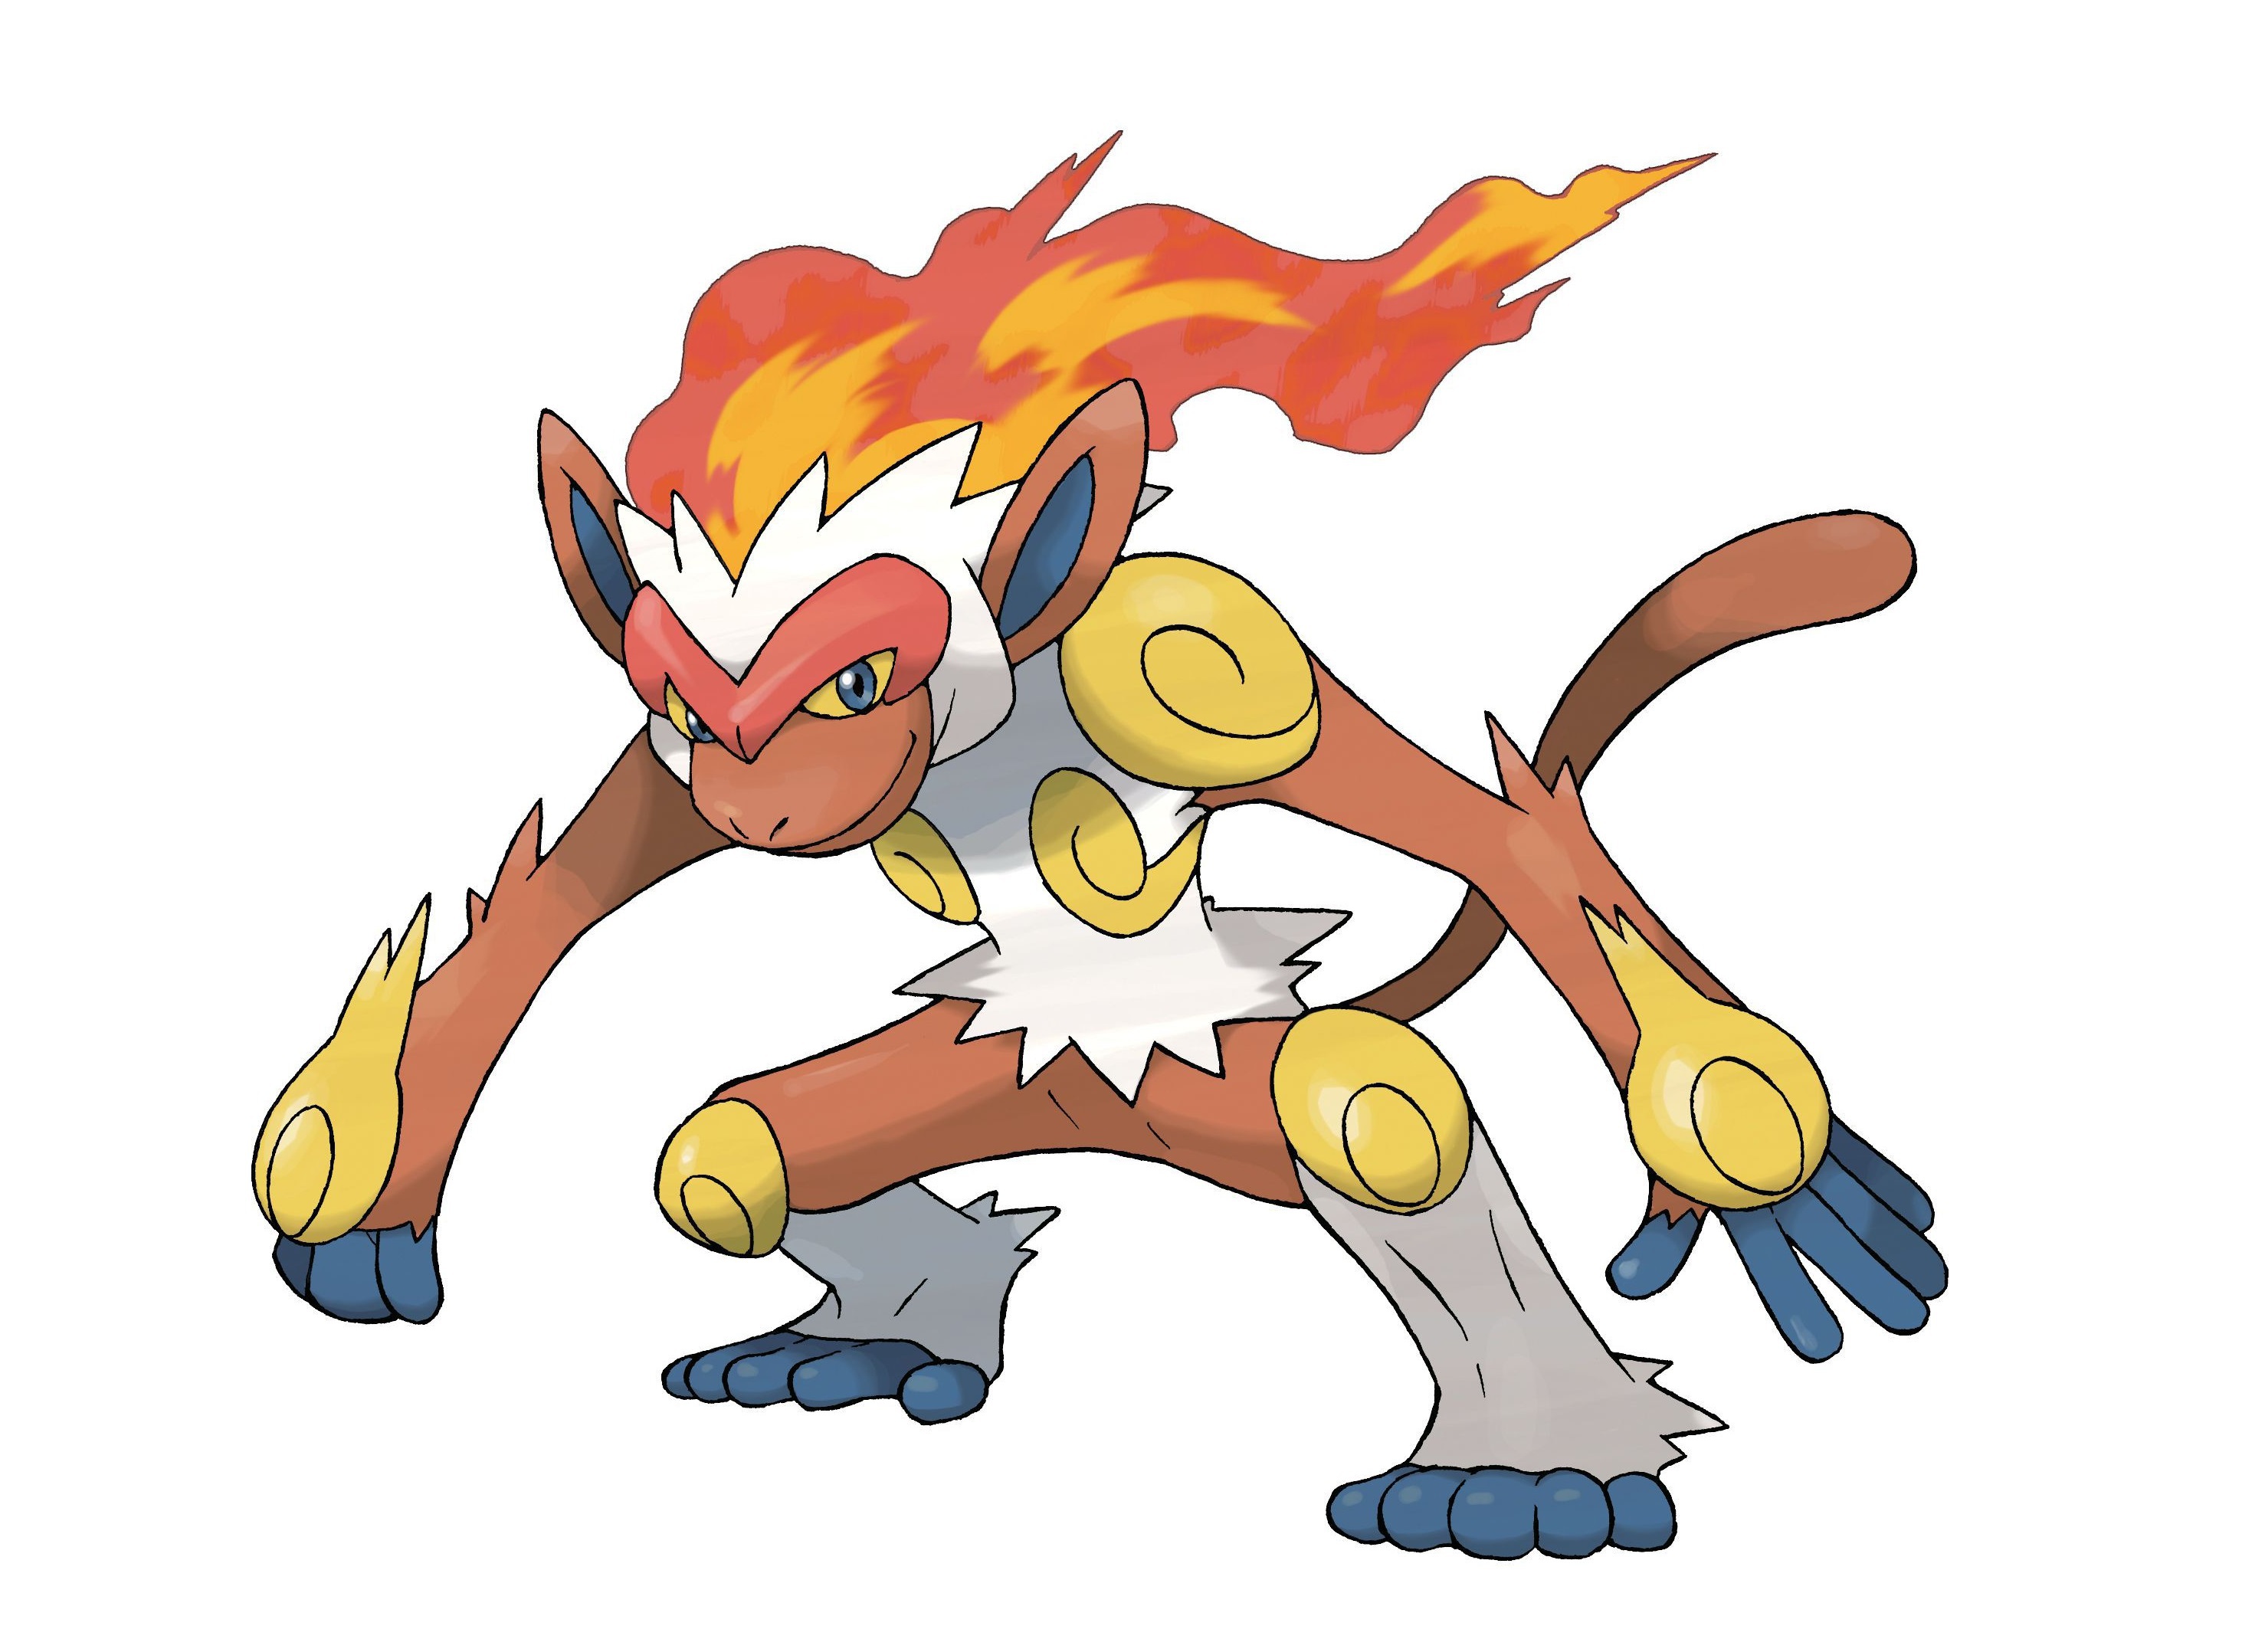 Infernape Wallpaper Image Photos Pictures Background